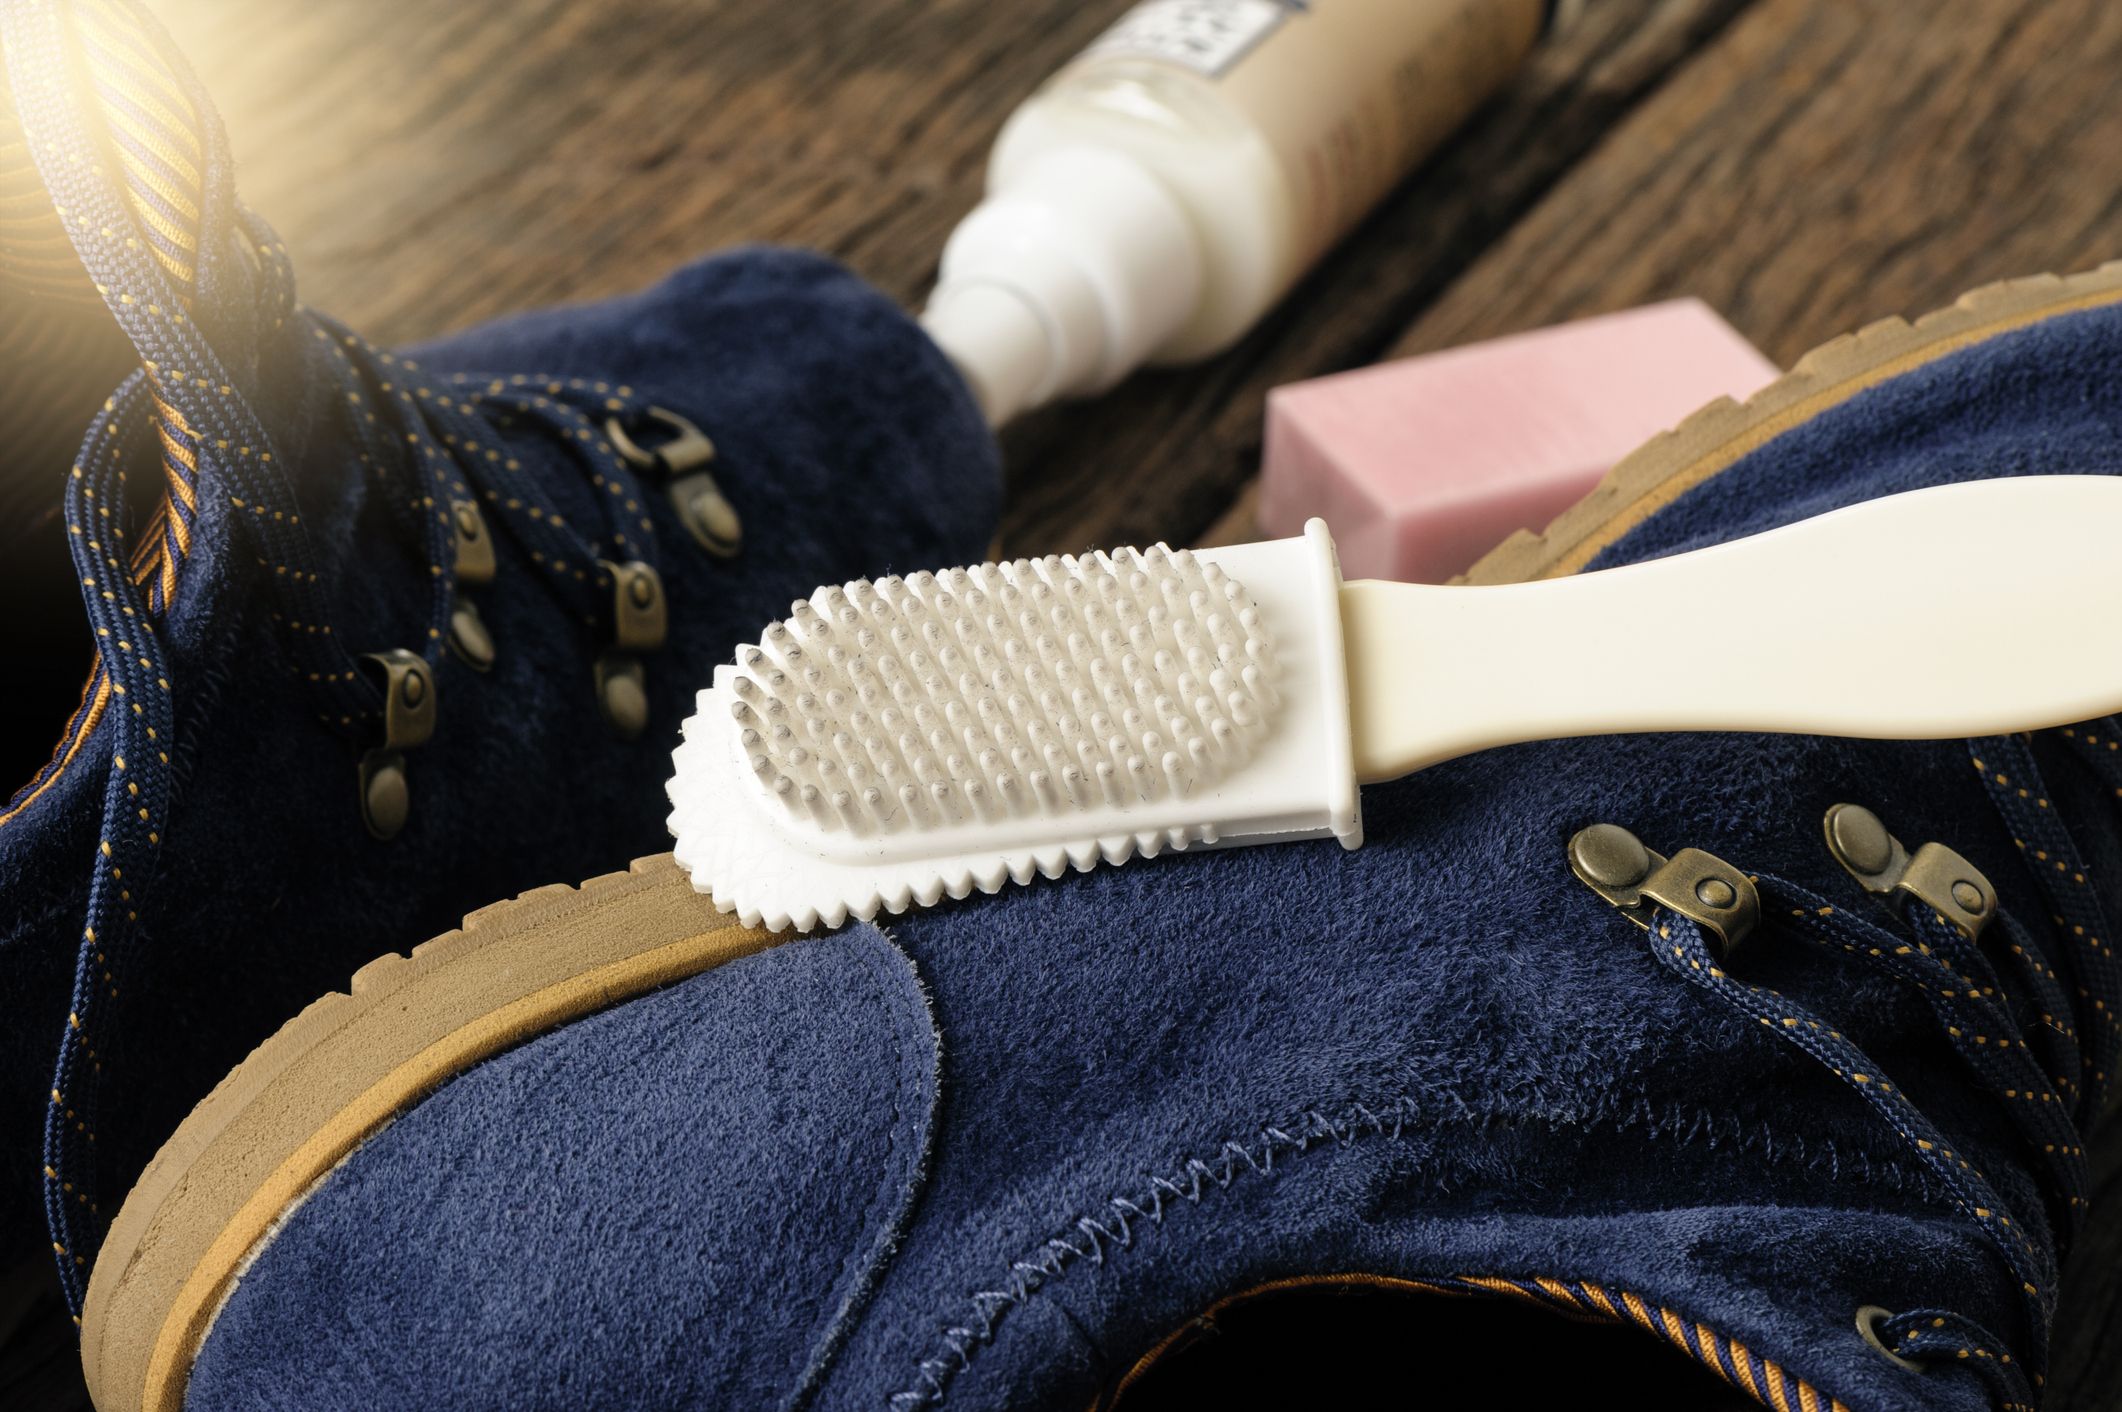 Hack To Clean Suede Shoes With Micellar Water Goes Viral